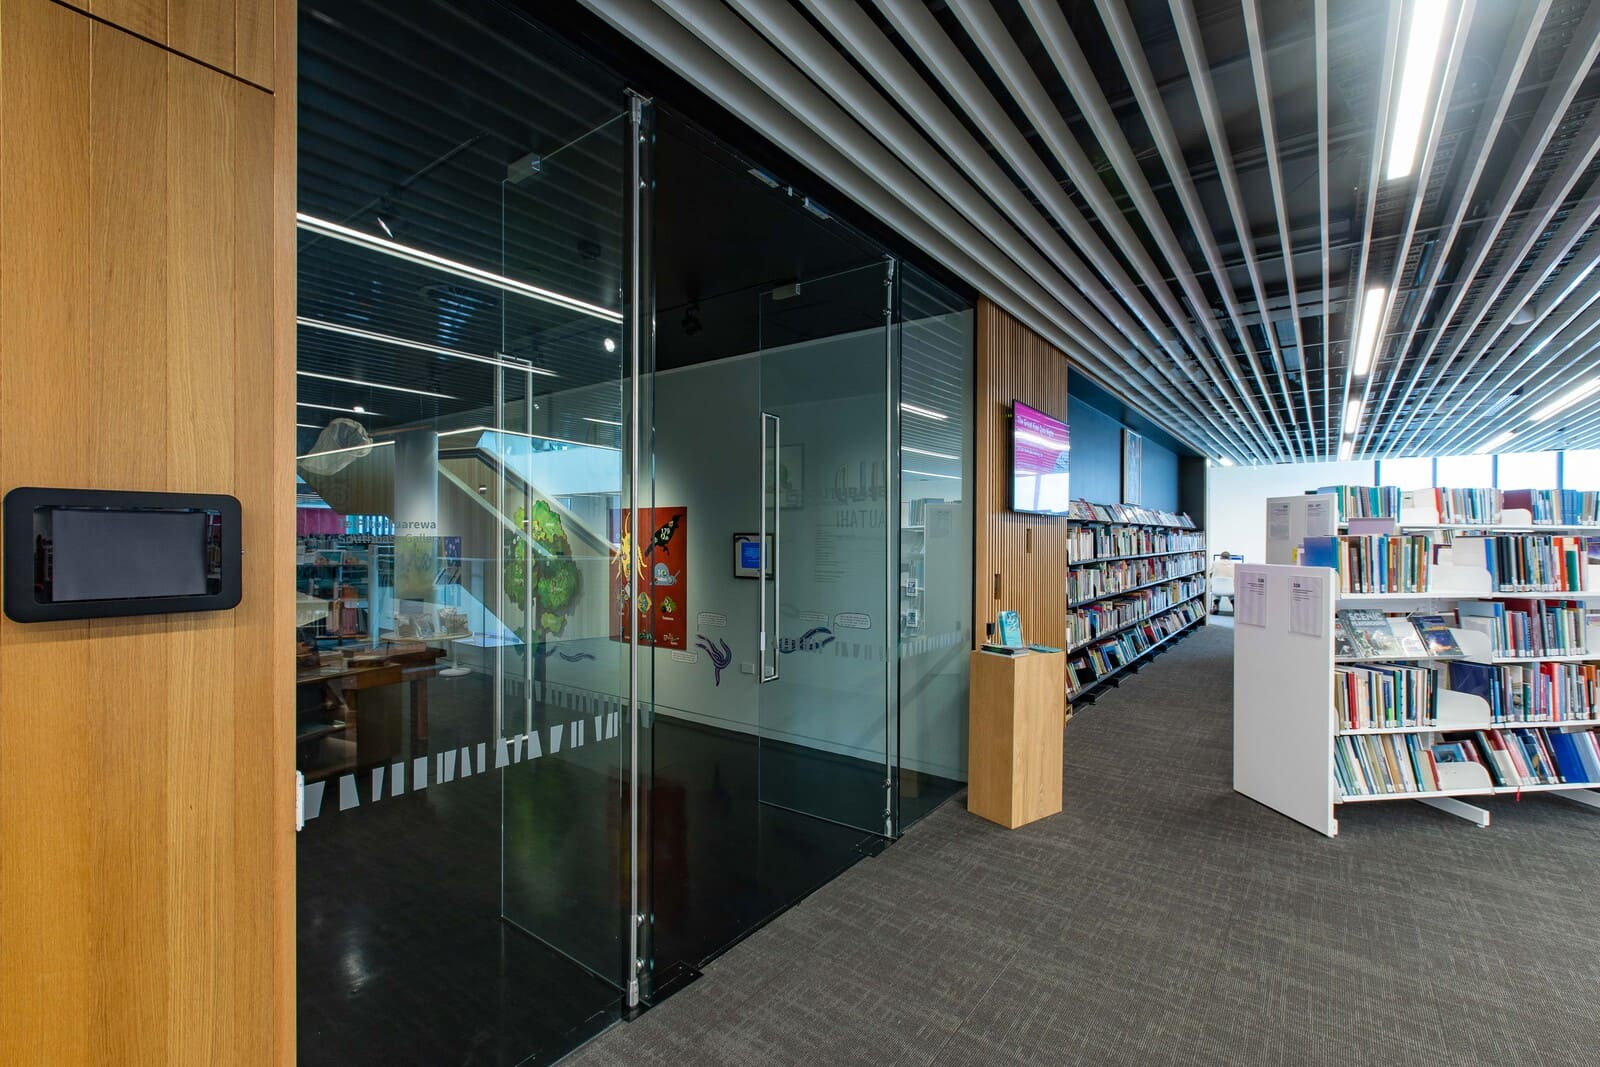 A modern library with glass doors, a unique ceiling, and shelves filled with books